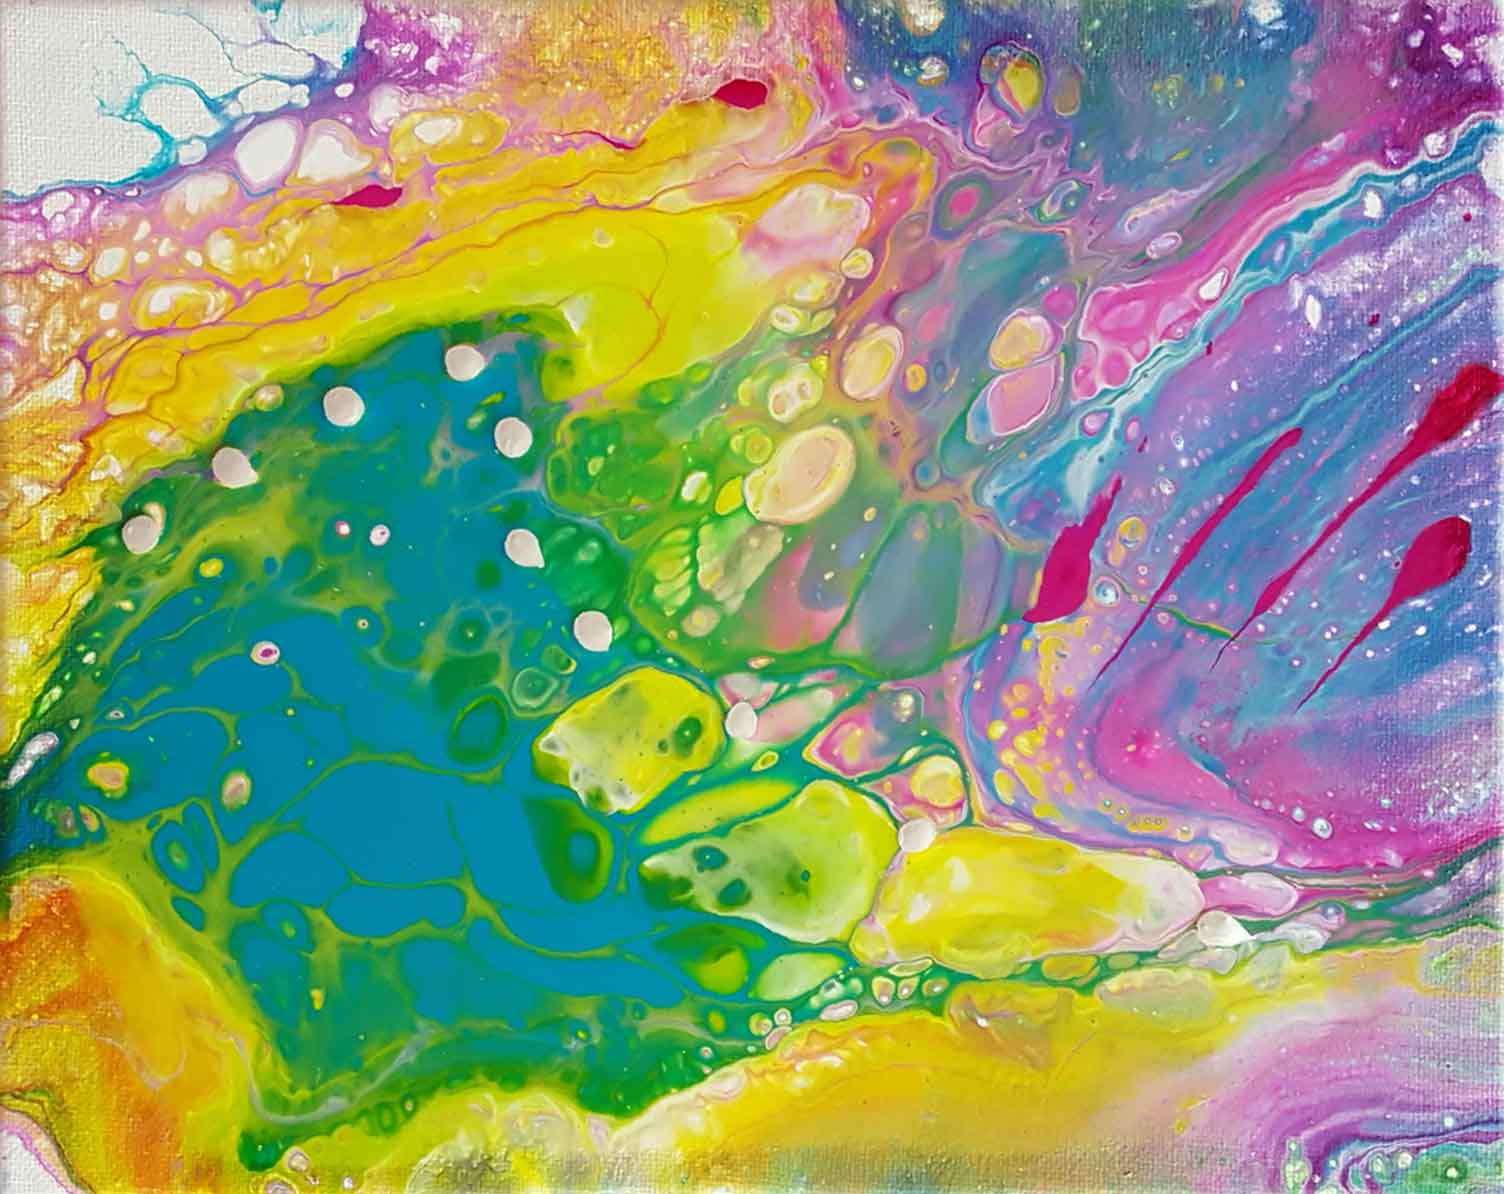 9 floetrol substitutes  Fluid acrylic painting, Acrylic pouring